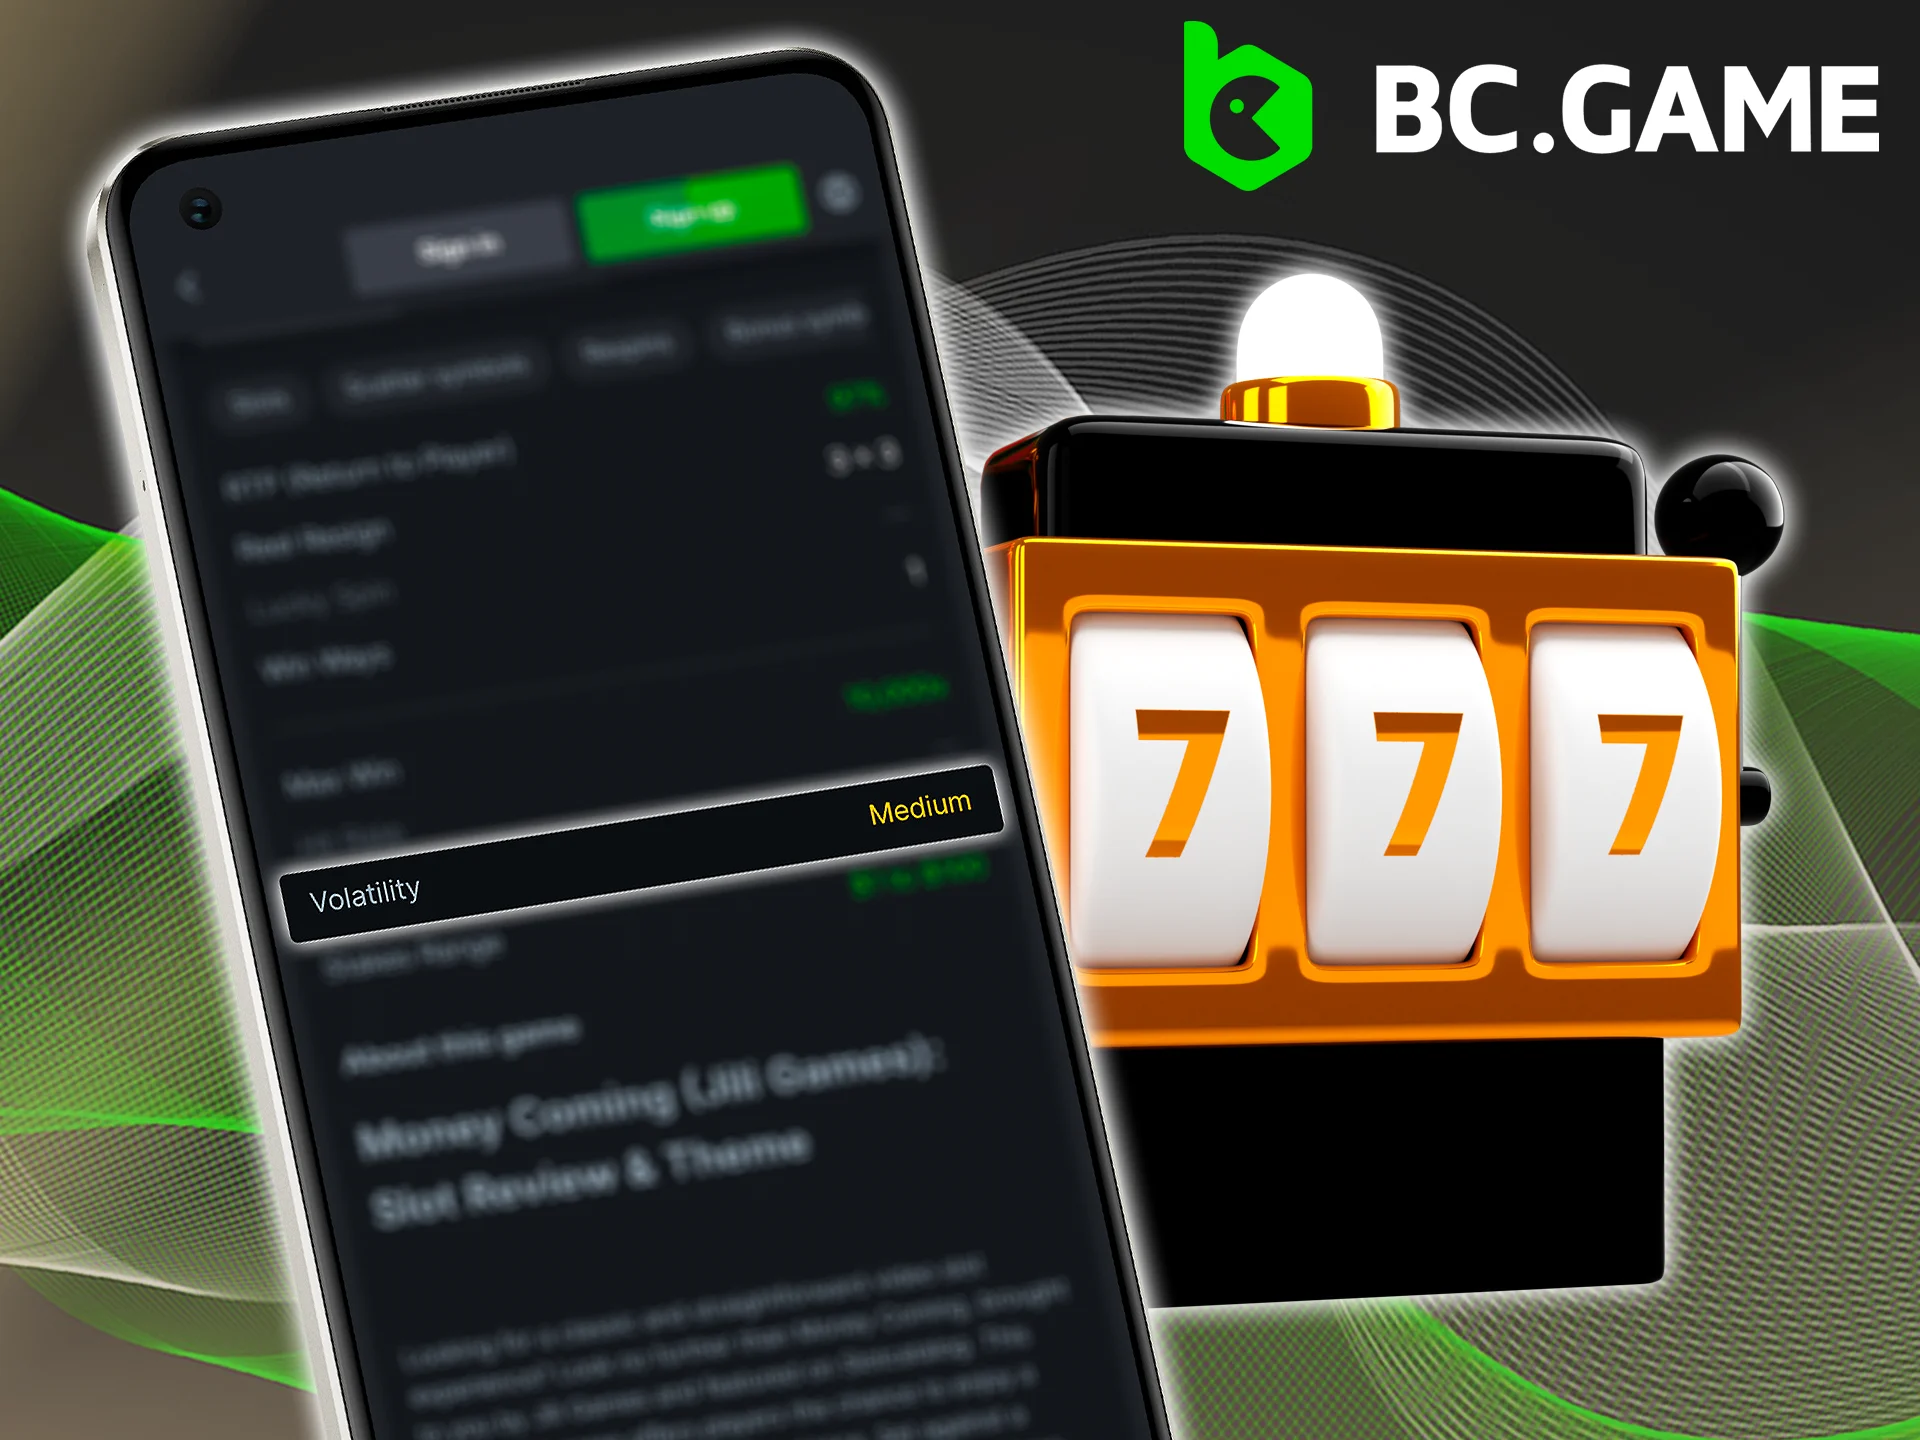 Explore the attributes of BC Game slots and start spinning the reels.